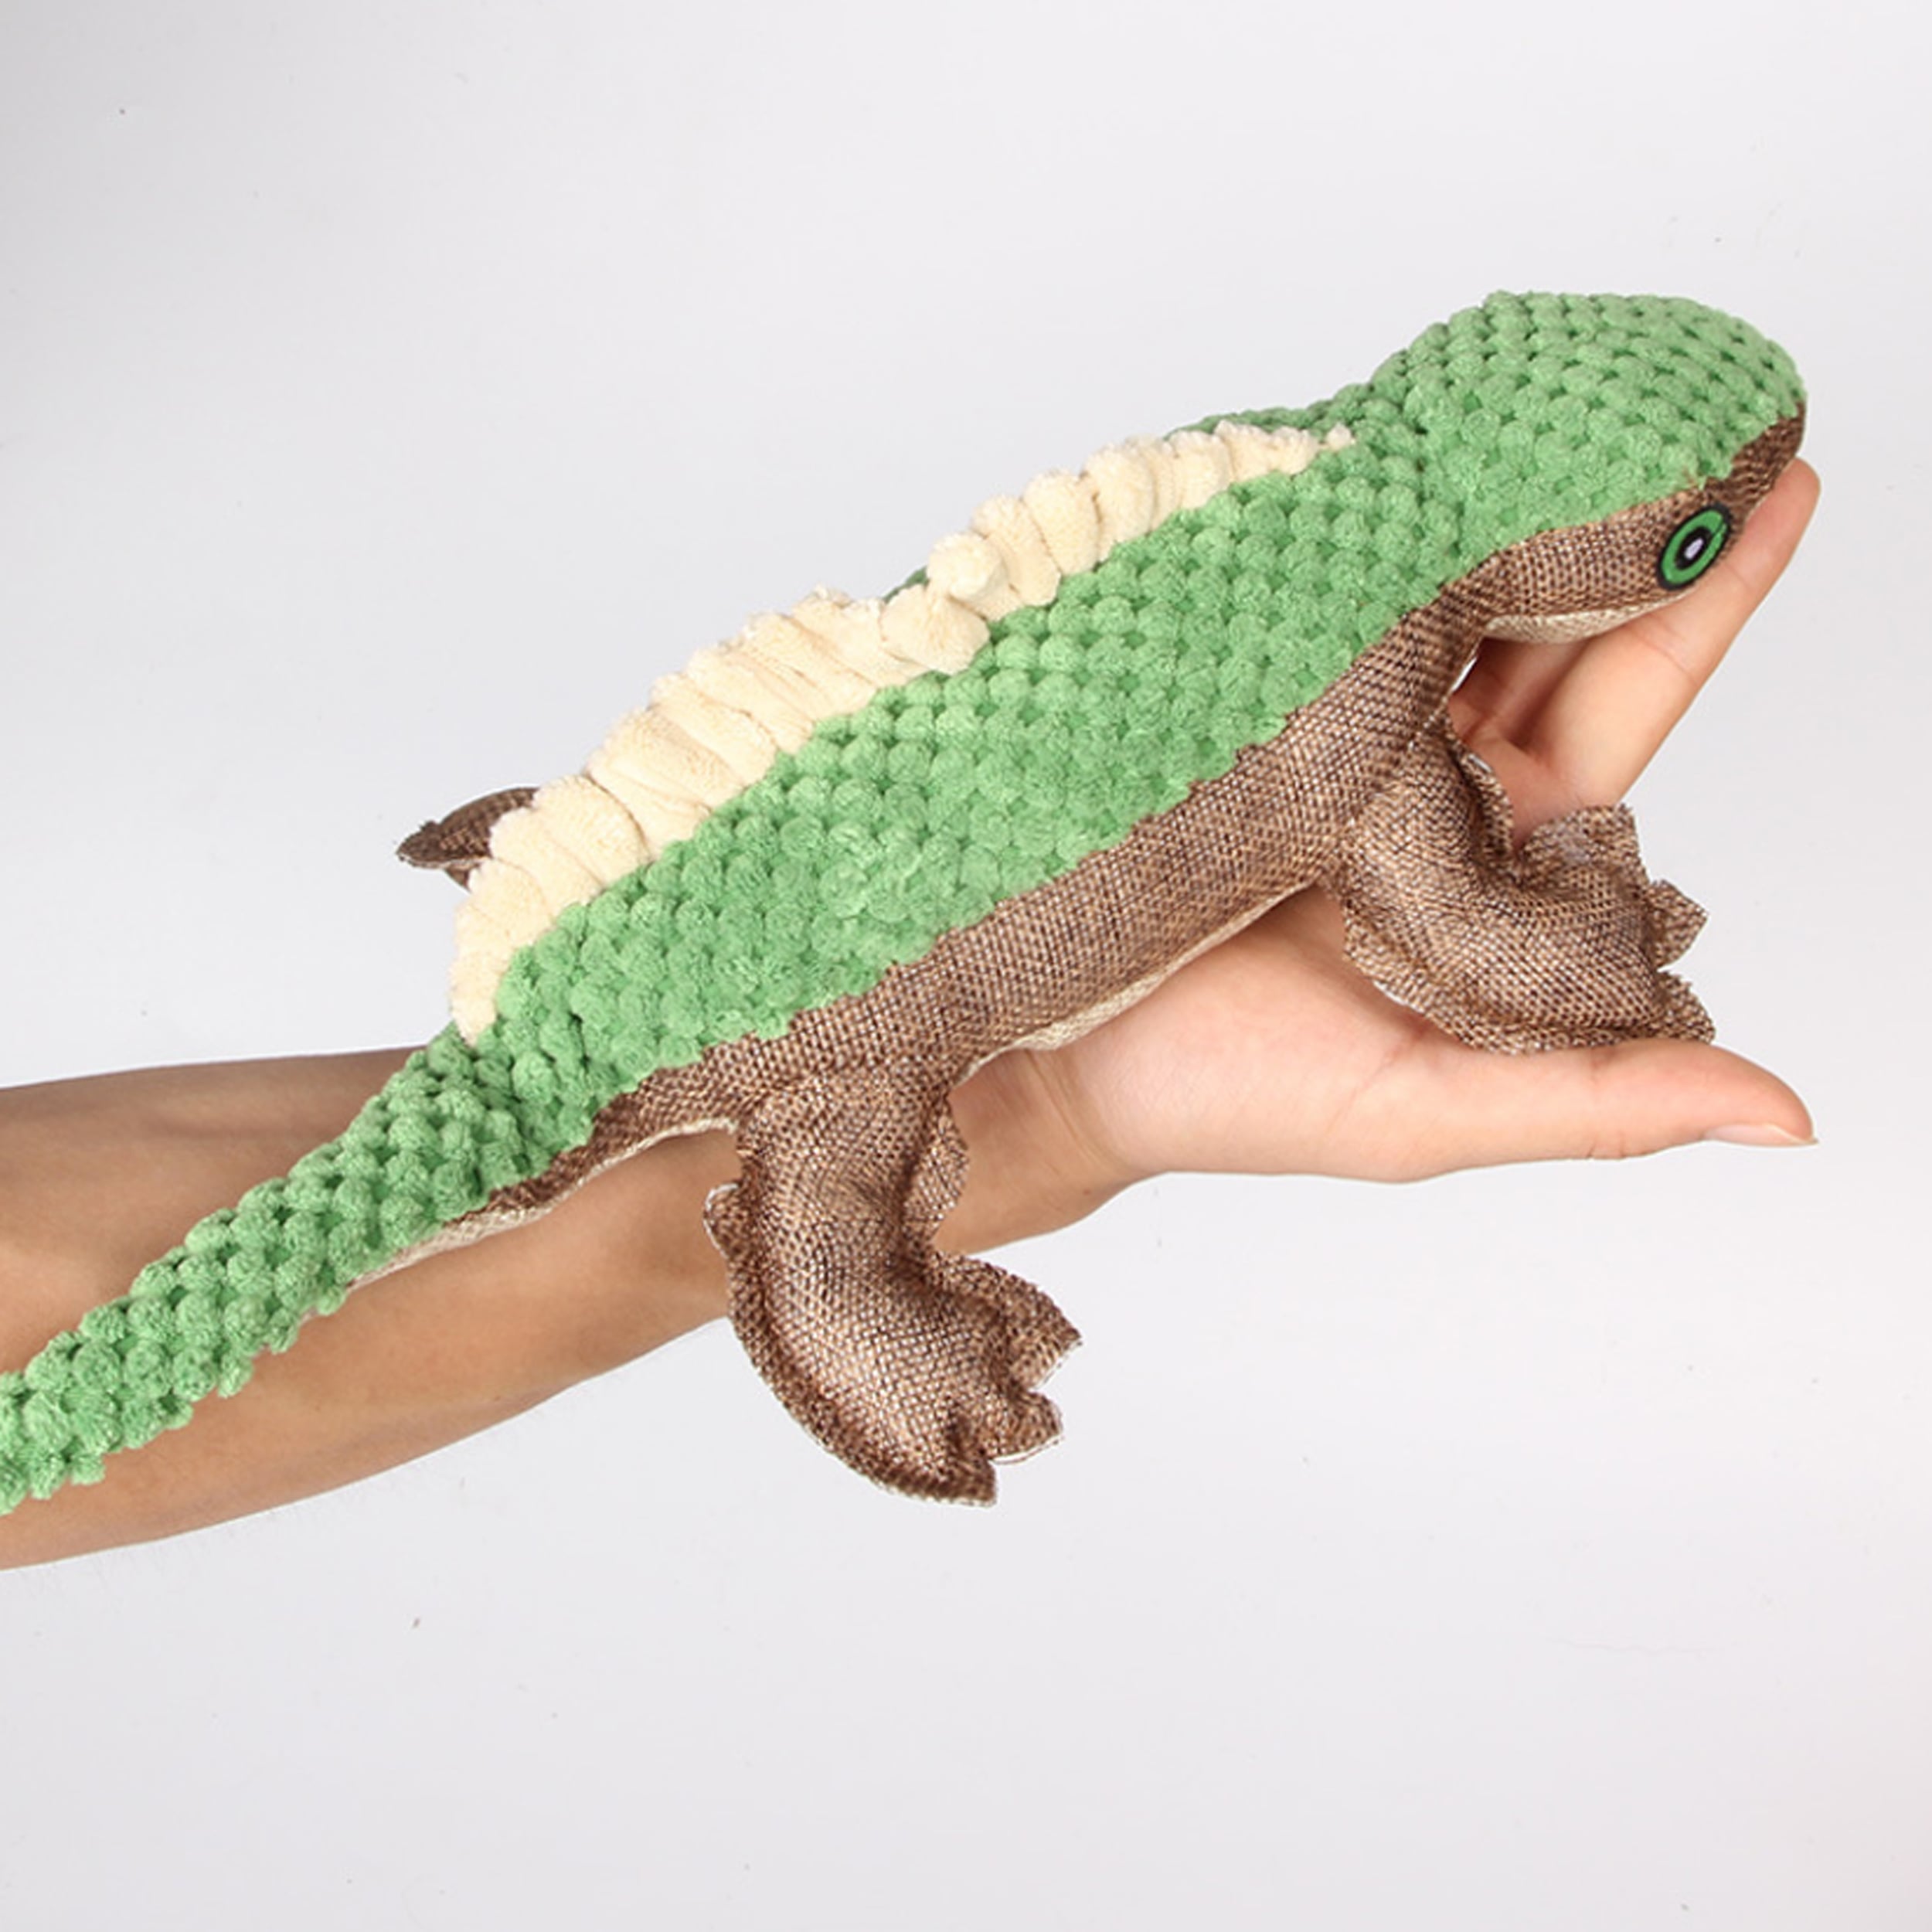 Keep Your Dog Active and Happy with Our Lizard-Shaped Plush Dog Chew Toy